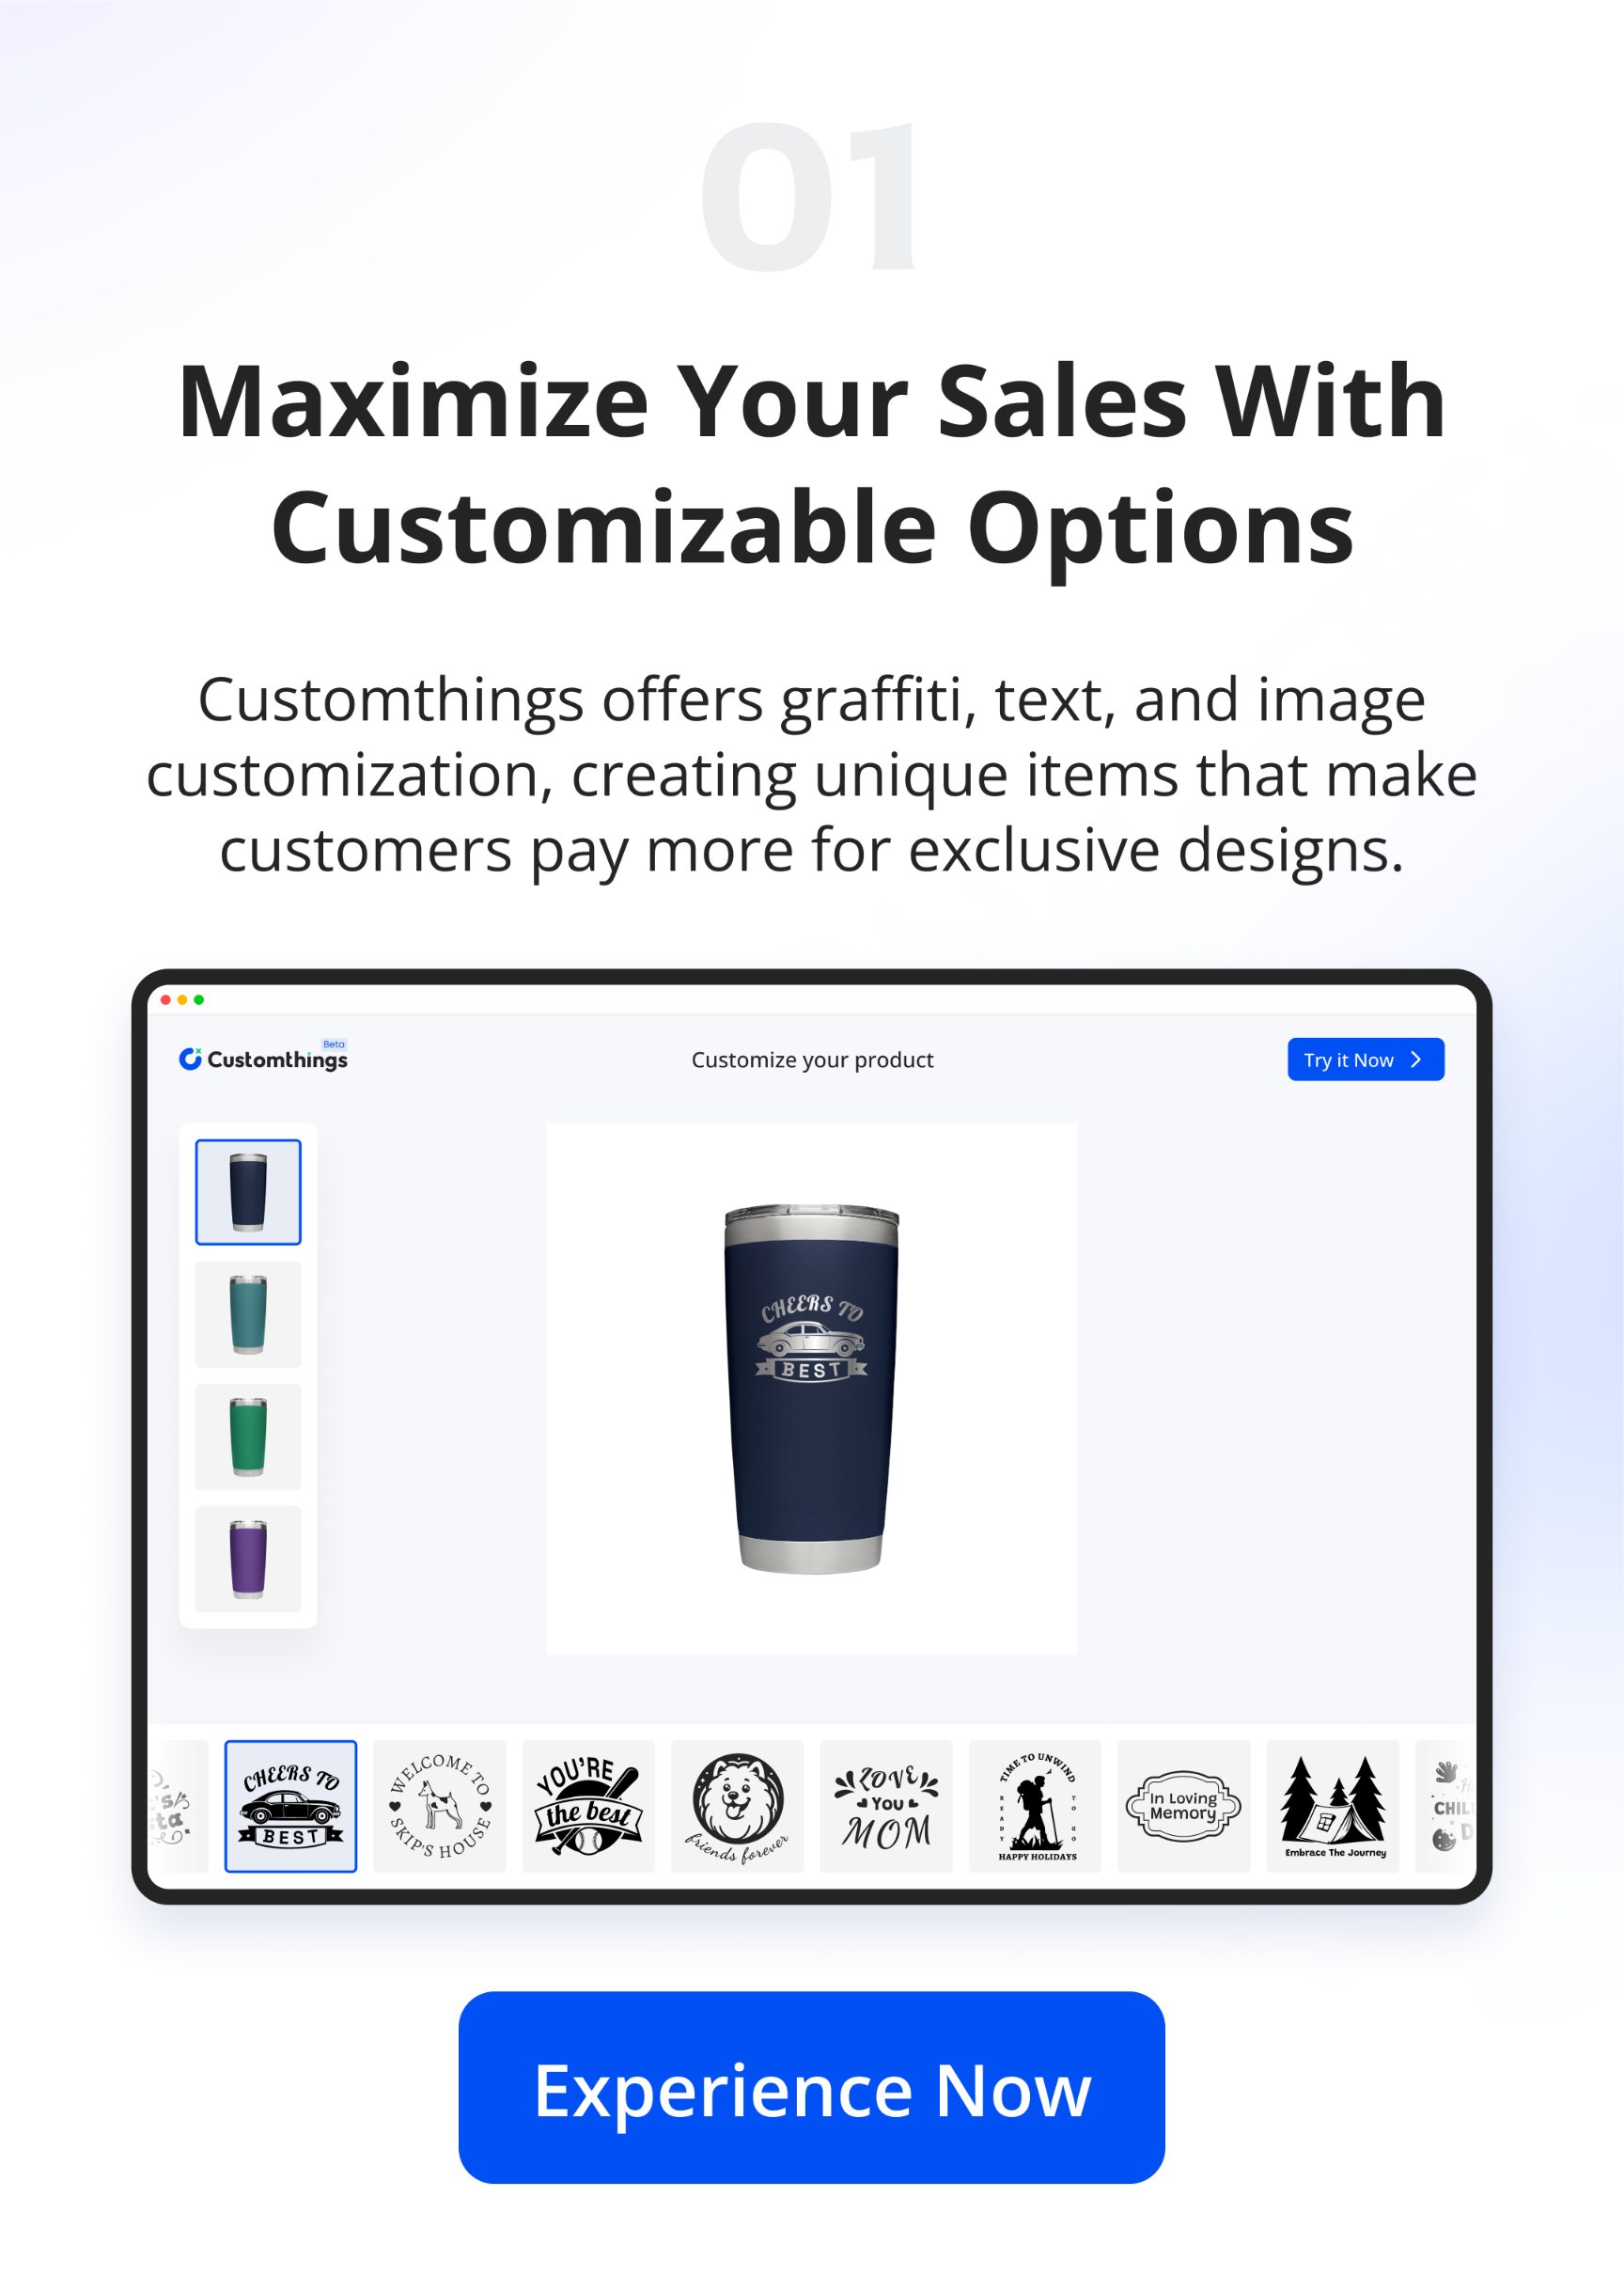 Maximize Your Sales with Customizable Options